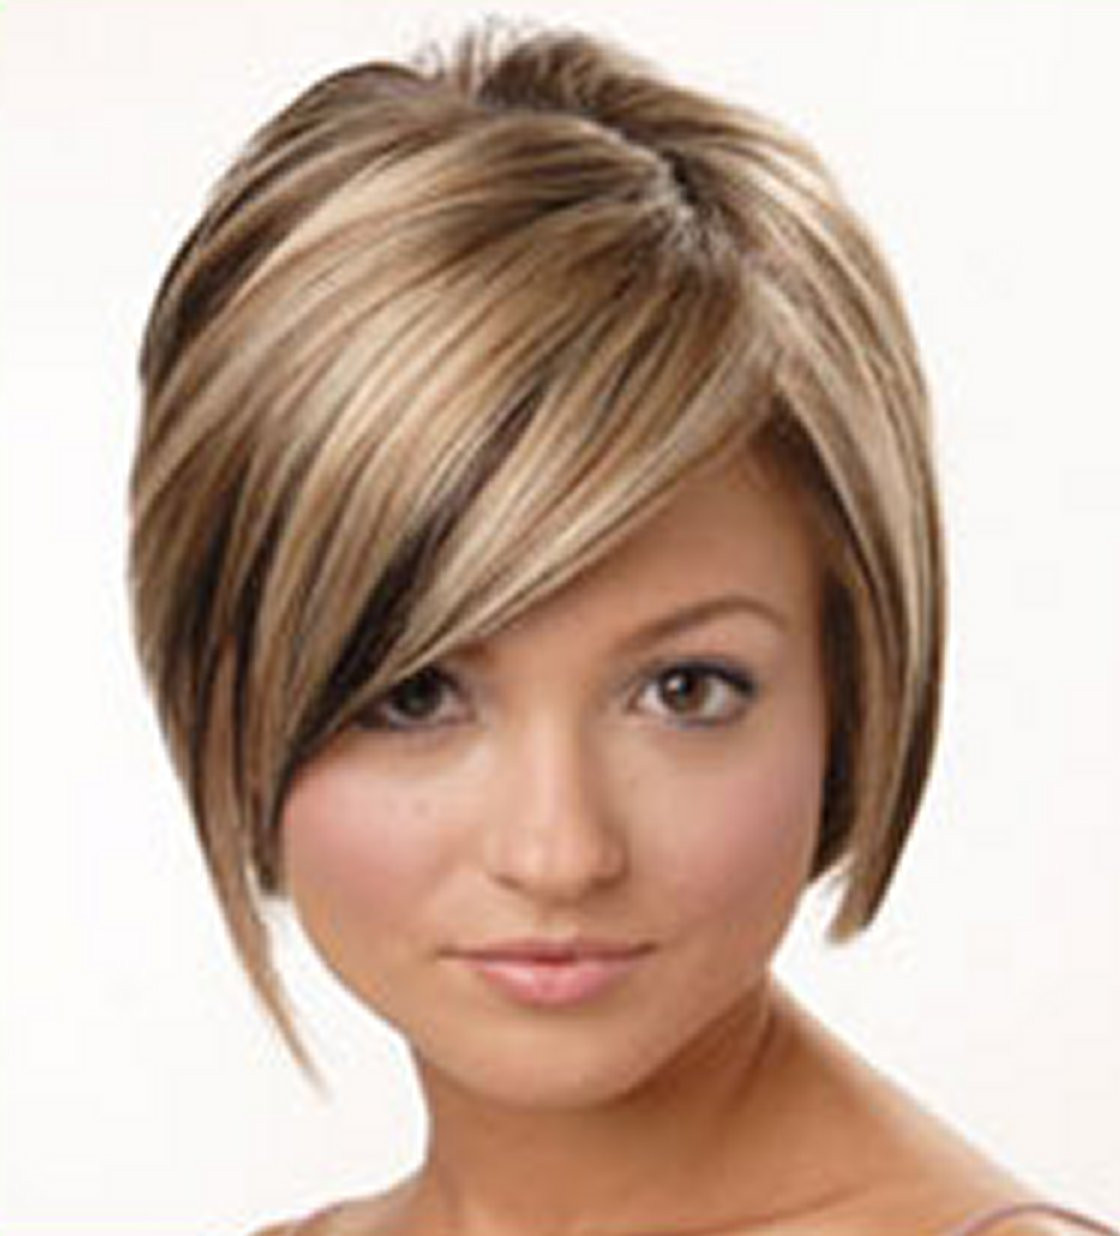 Girls Short Haircuts
 Best Short Hairstyles for Girls